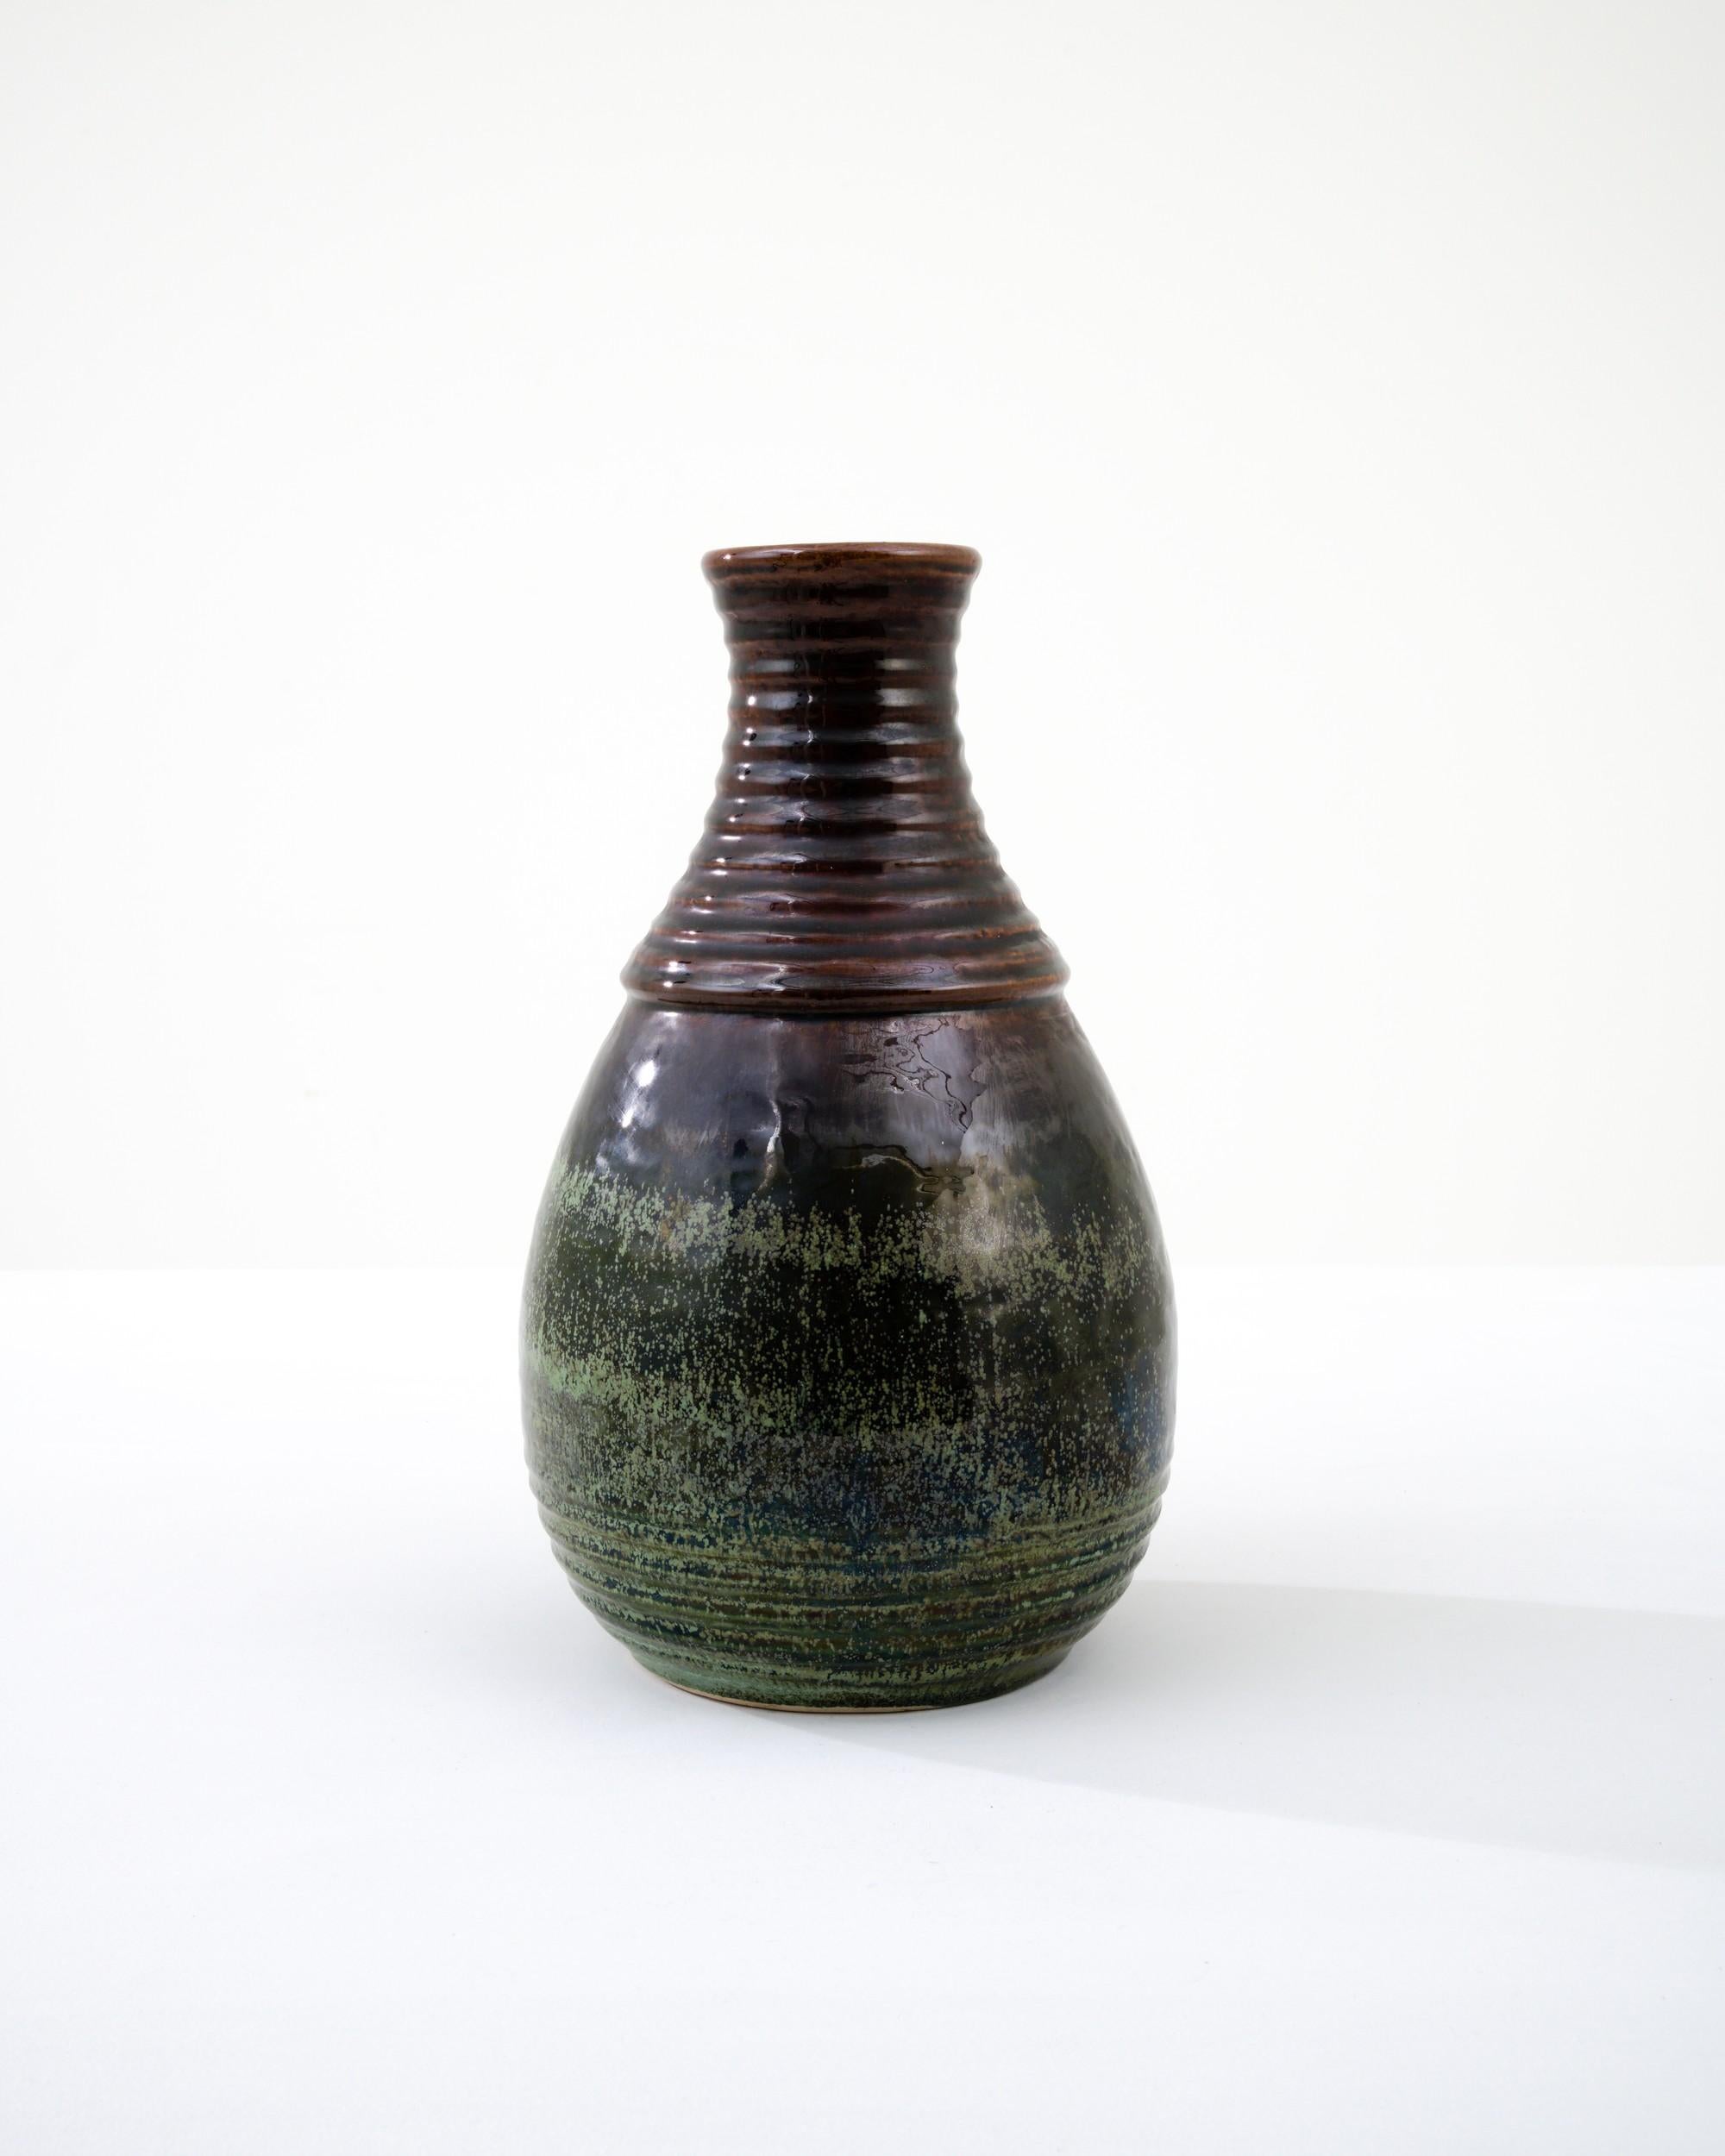 A ceramic vase from mid-20th century Germany. Neither large nor small, this studio made pot reflects the hand-held, and the handmade; the tactility of process and the artist's vision– realized on the potter’s wheel. Rich earth tones saturate the